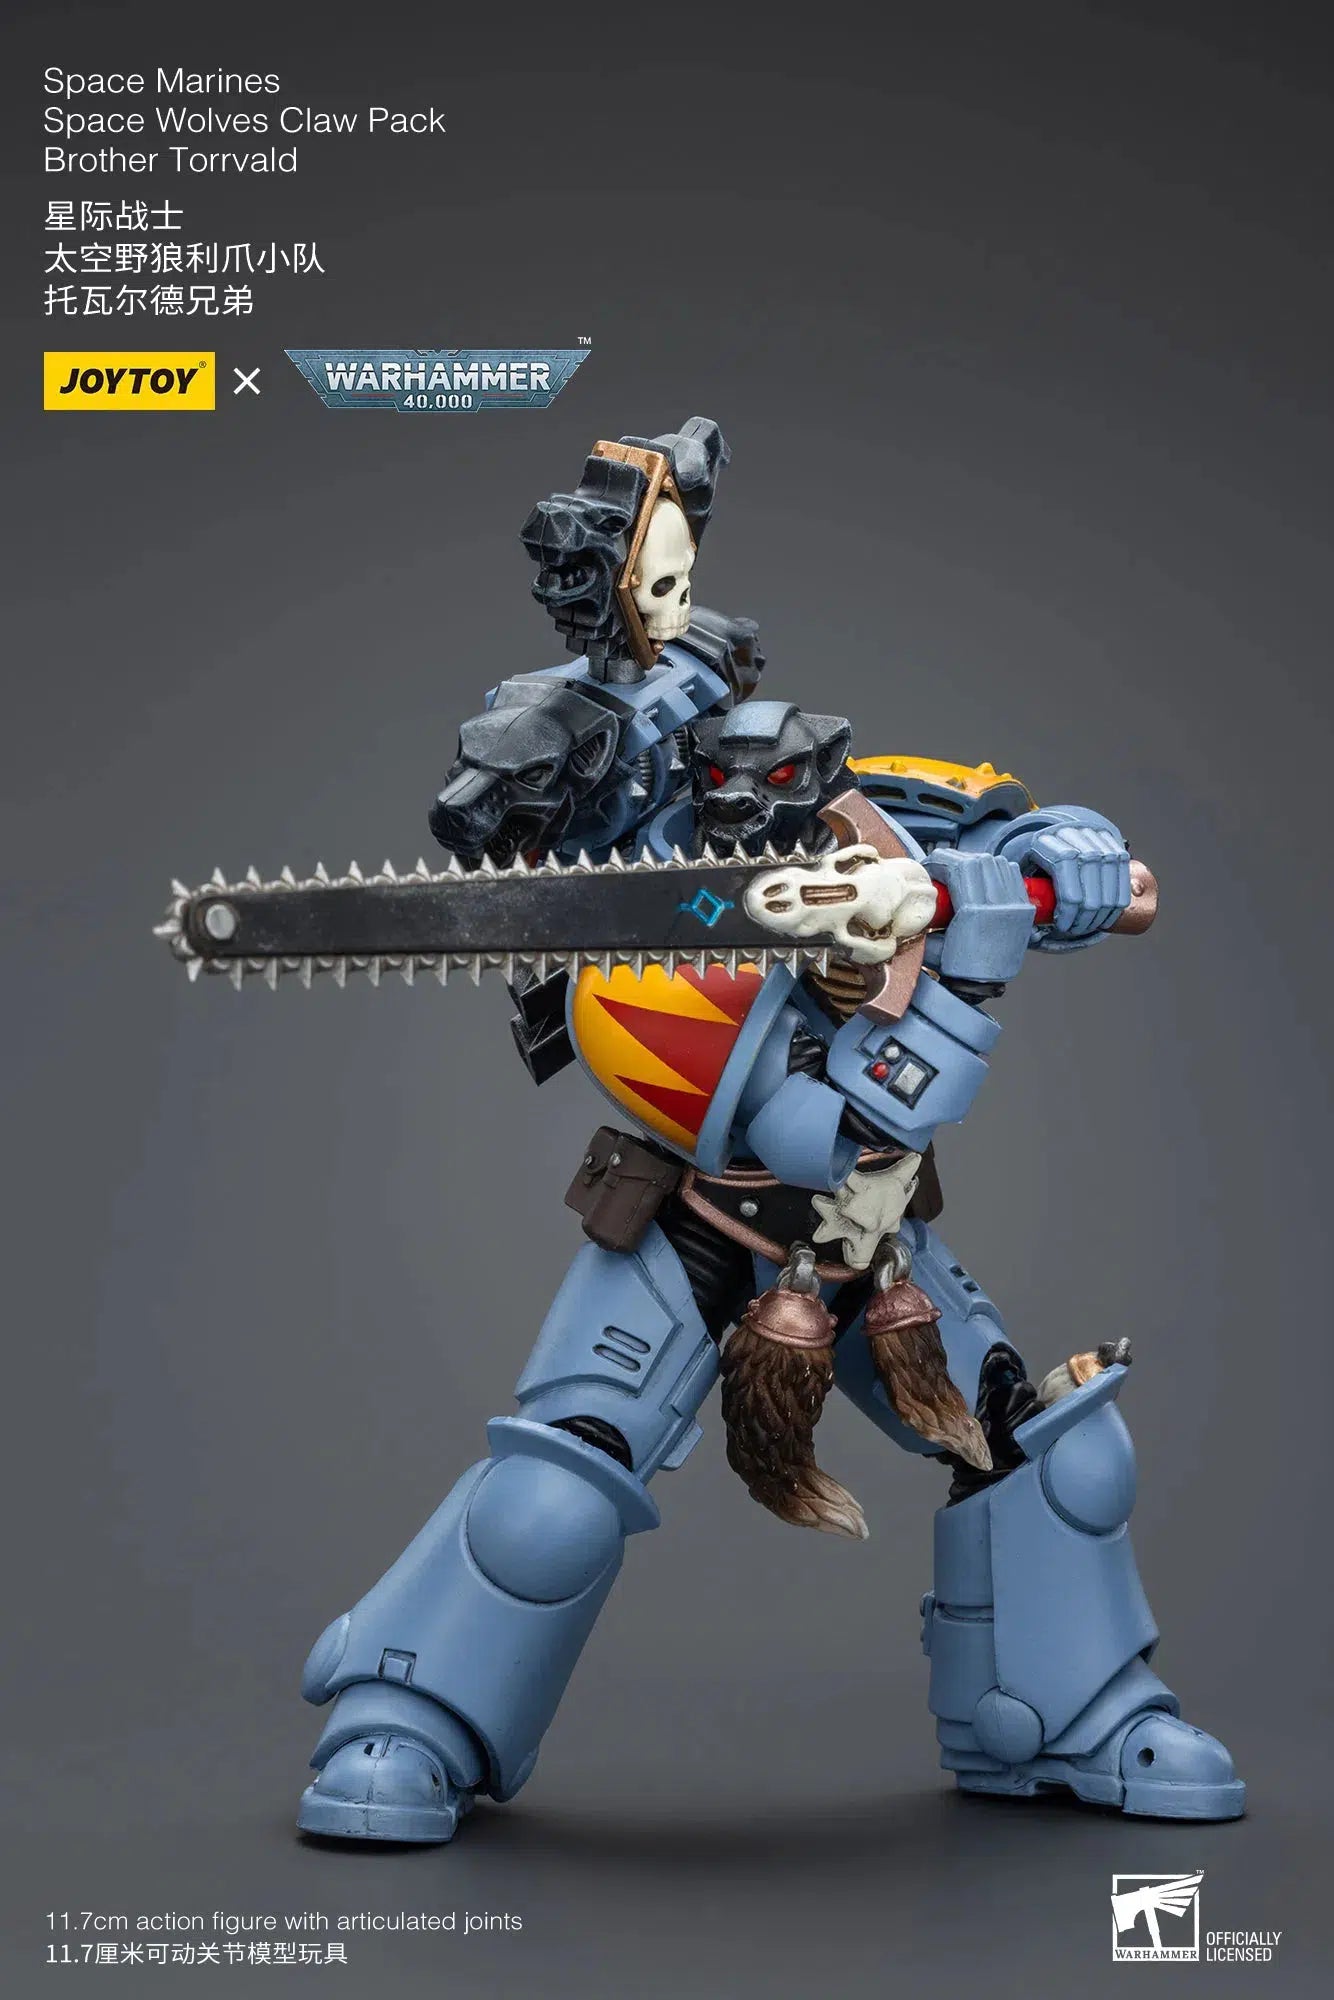 Warhammer 40K: Space Wolves: Claw Pack: Brother Torrvald: Joy Toy